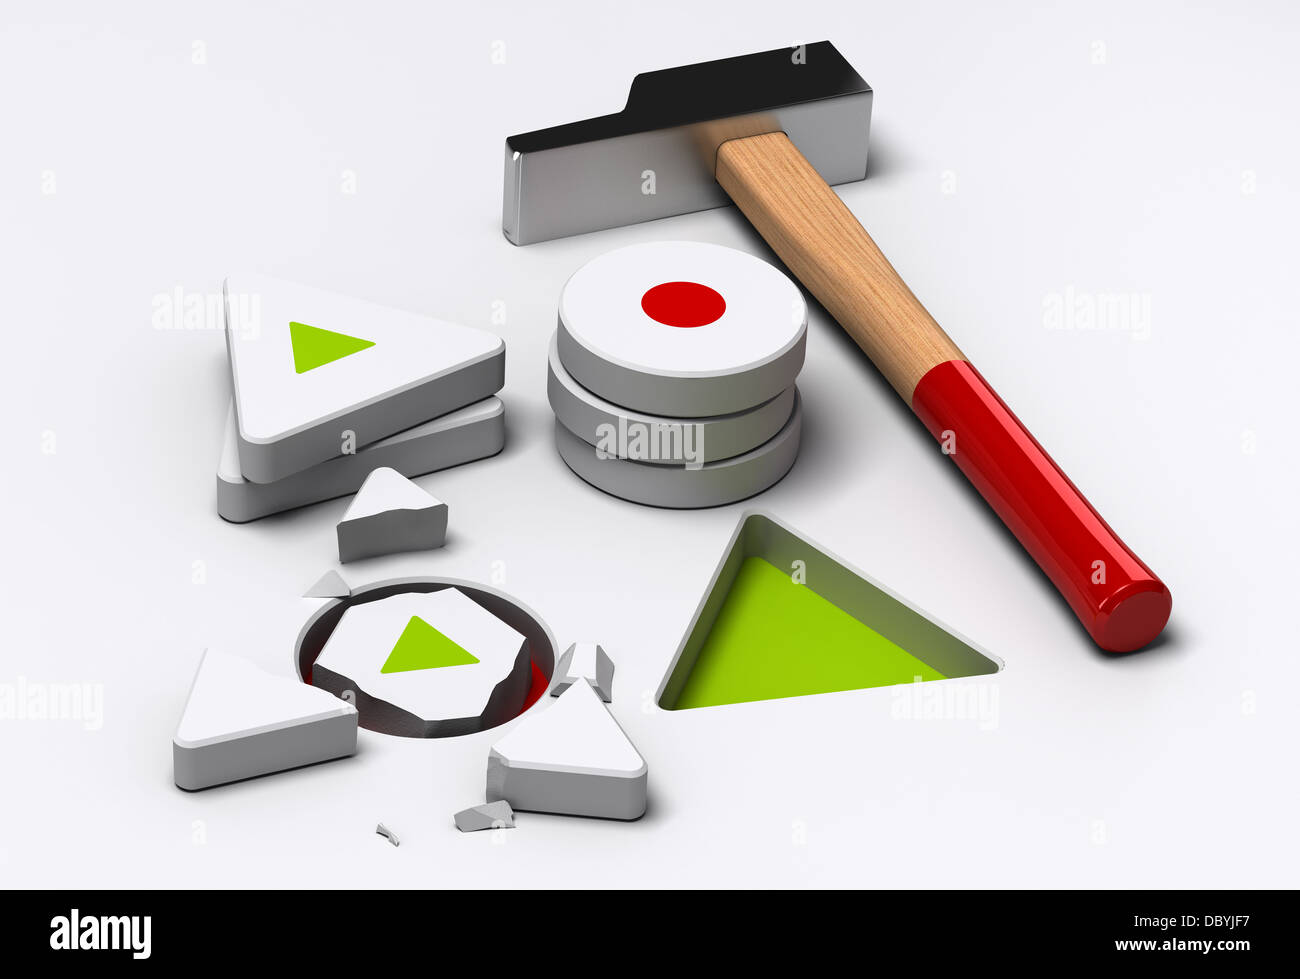 triangular and circle shapes with a hammer and one broken shape Stock Photo